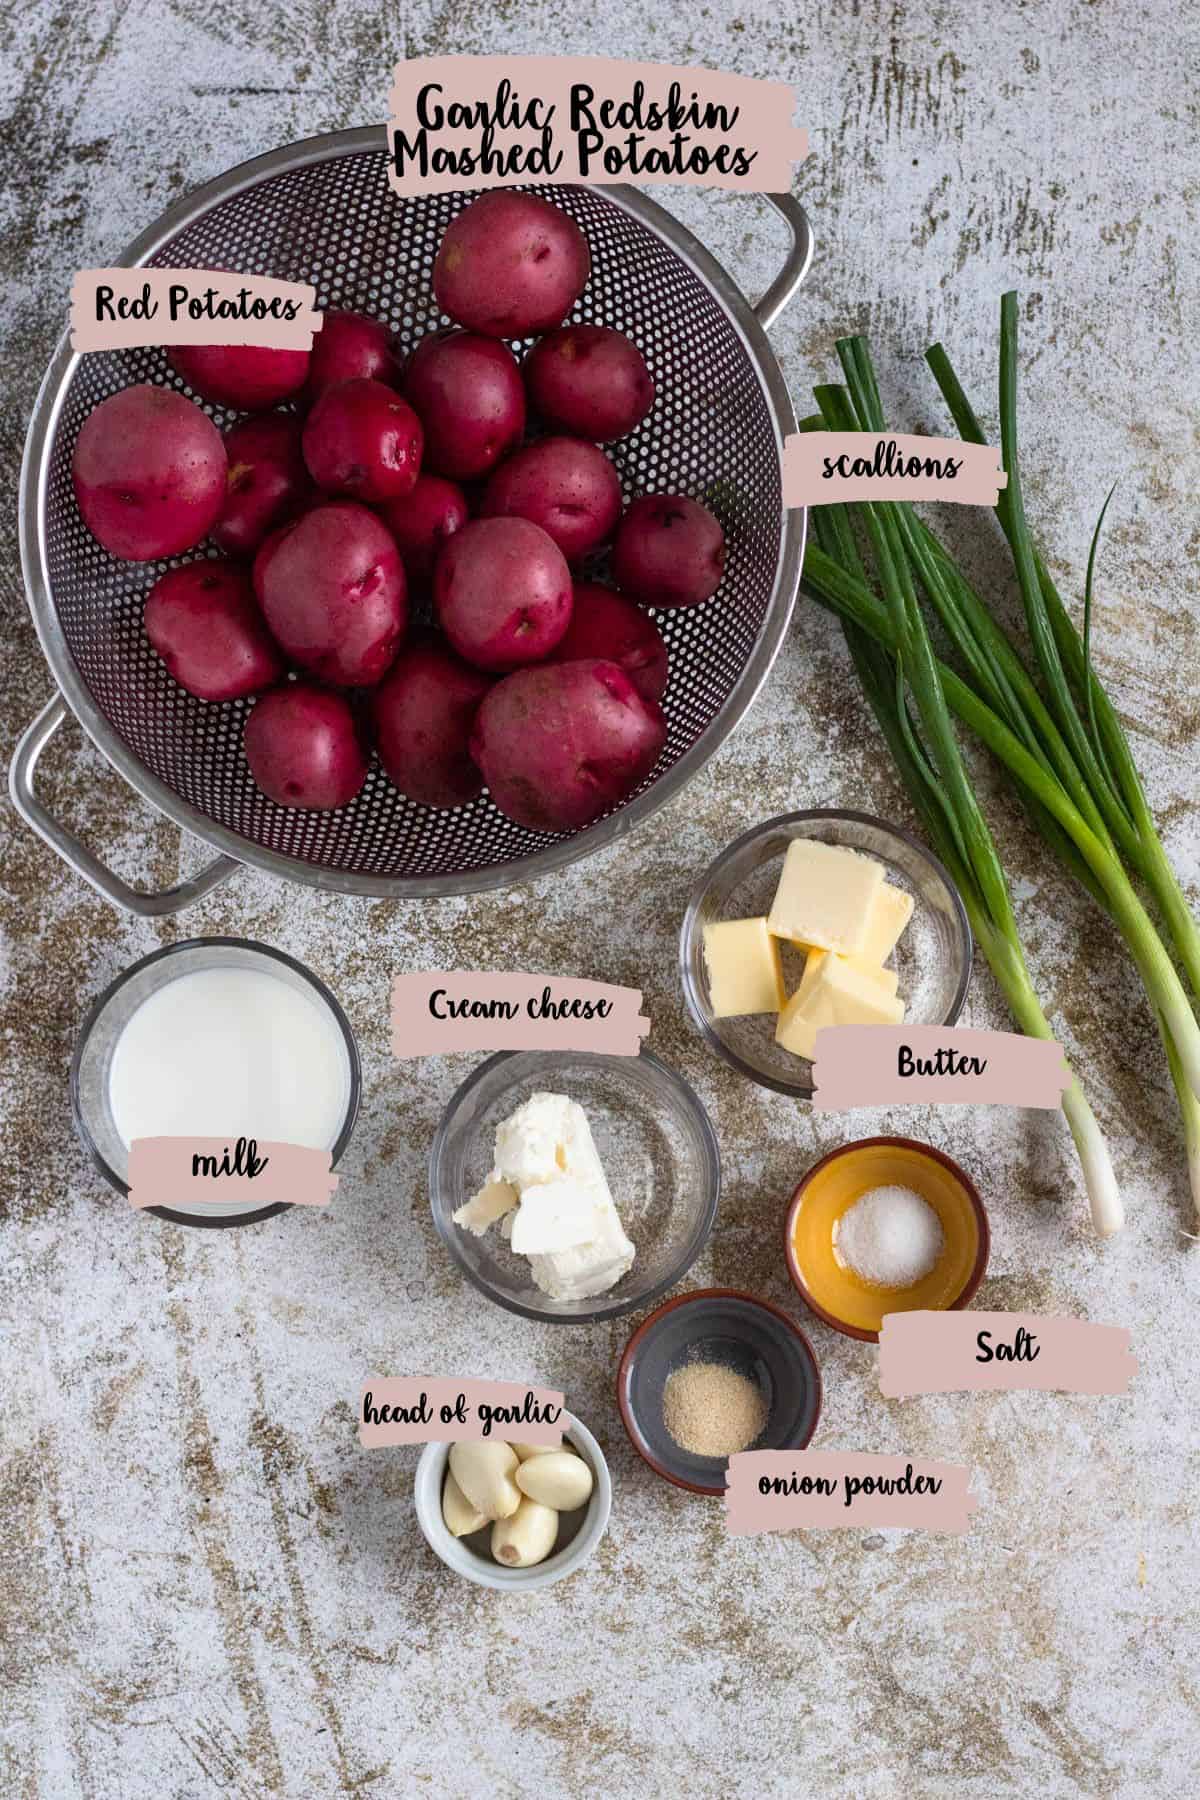 Ingredients shown that are needed to prepare garlic redskin mashed potatoes. 